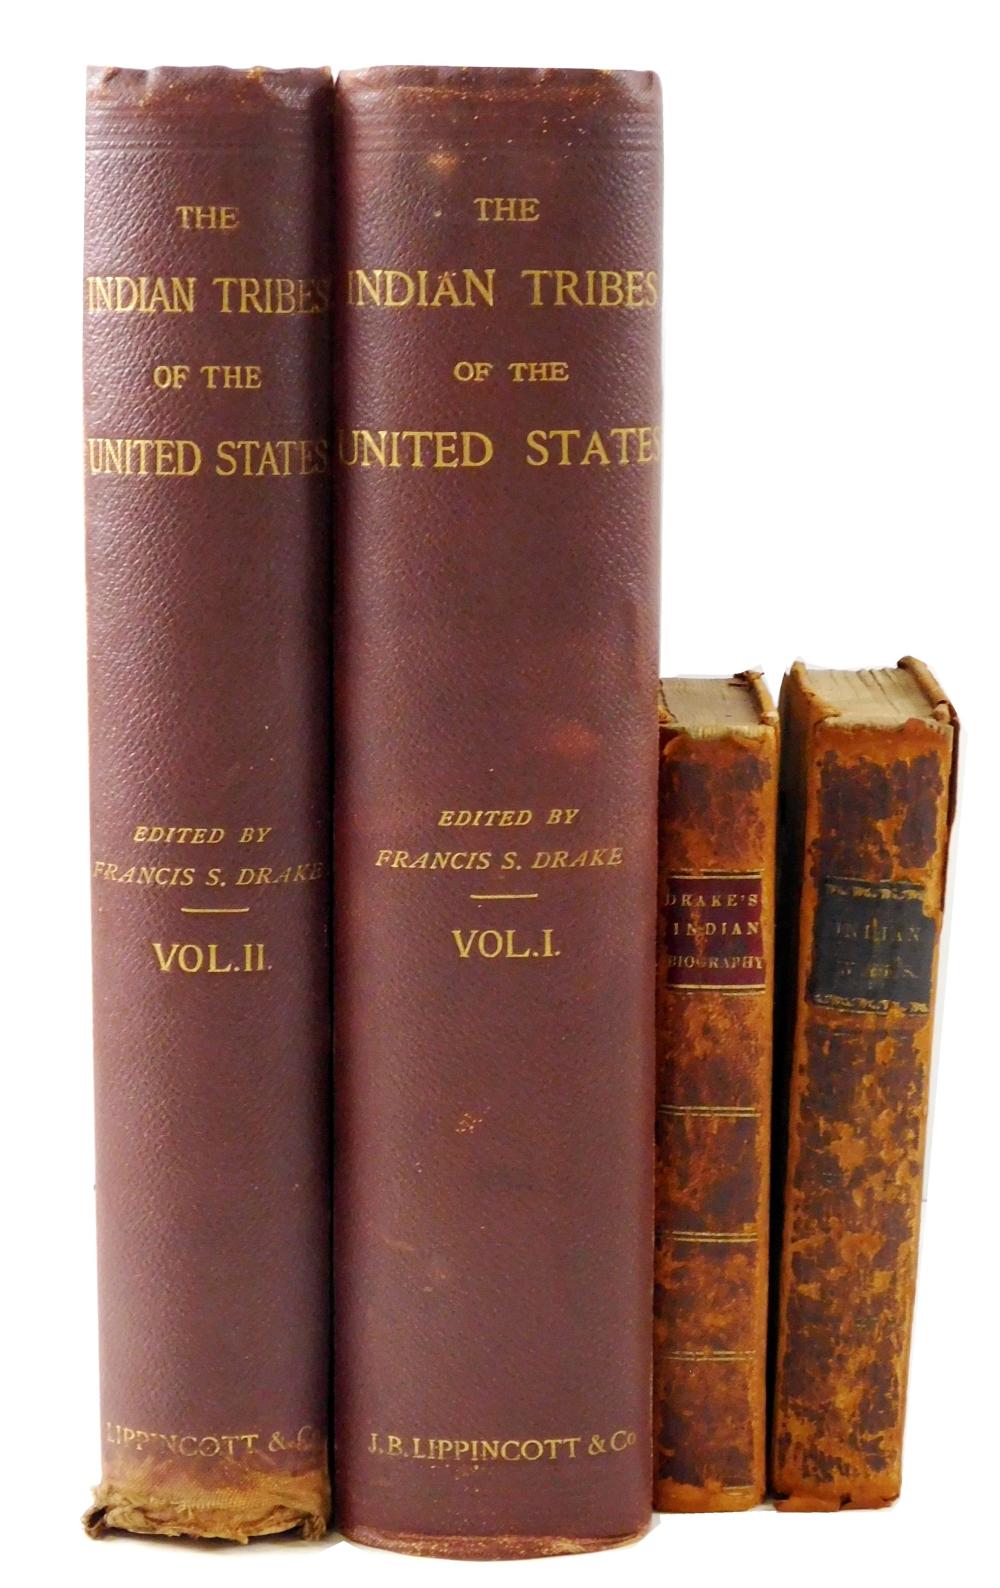 BOOKS FOUR VOLUMES ON NATIVE AMERICANS 2e2bec